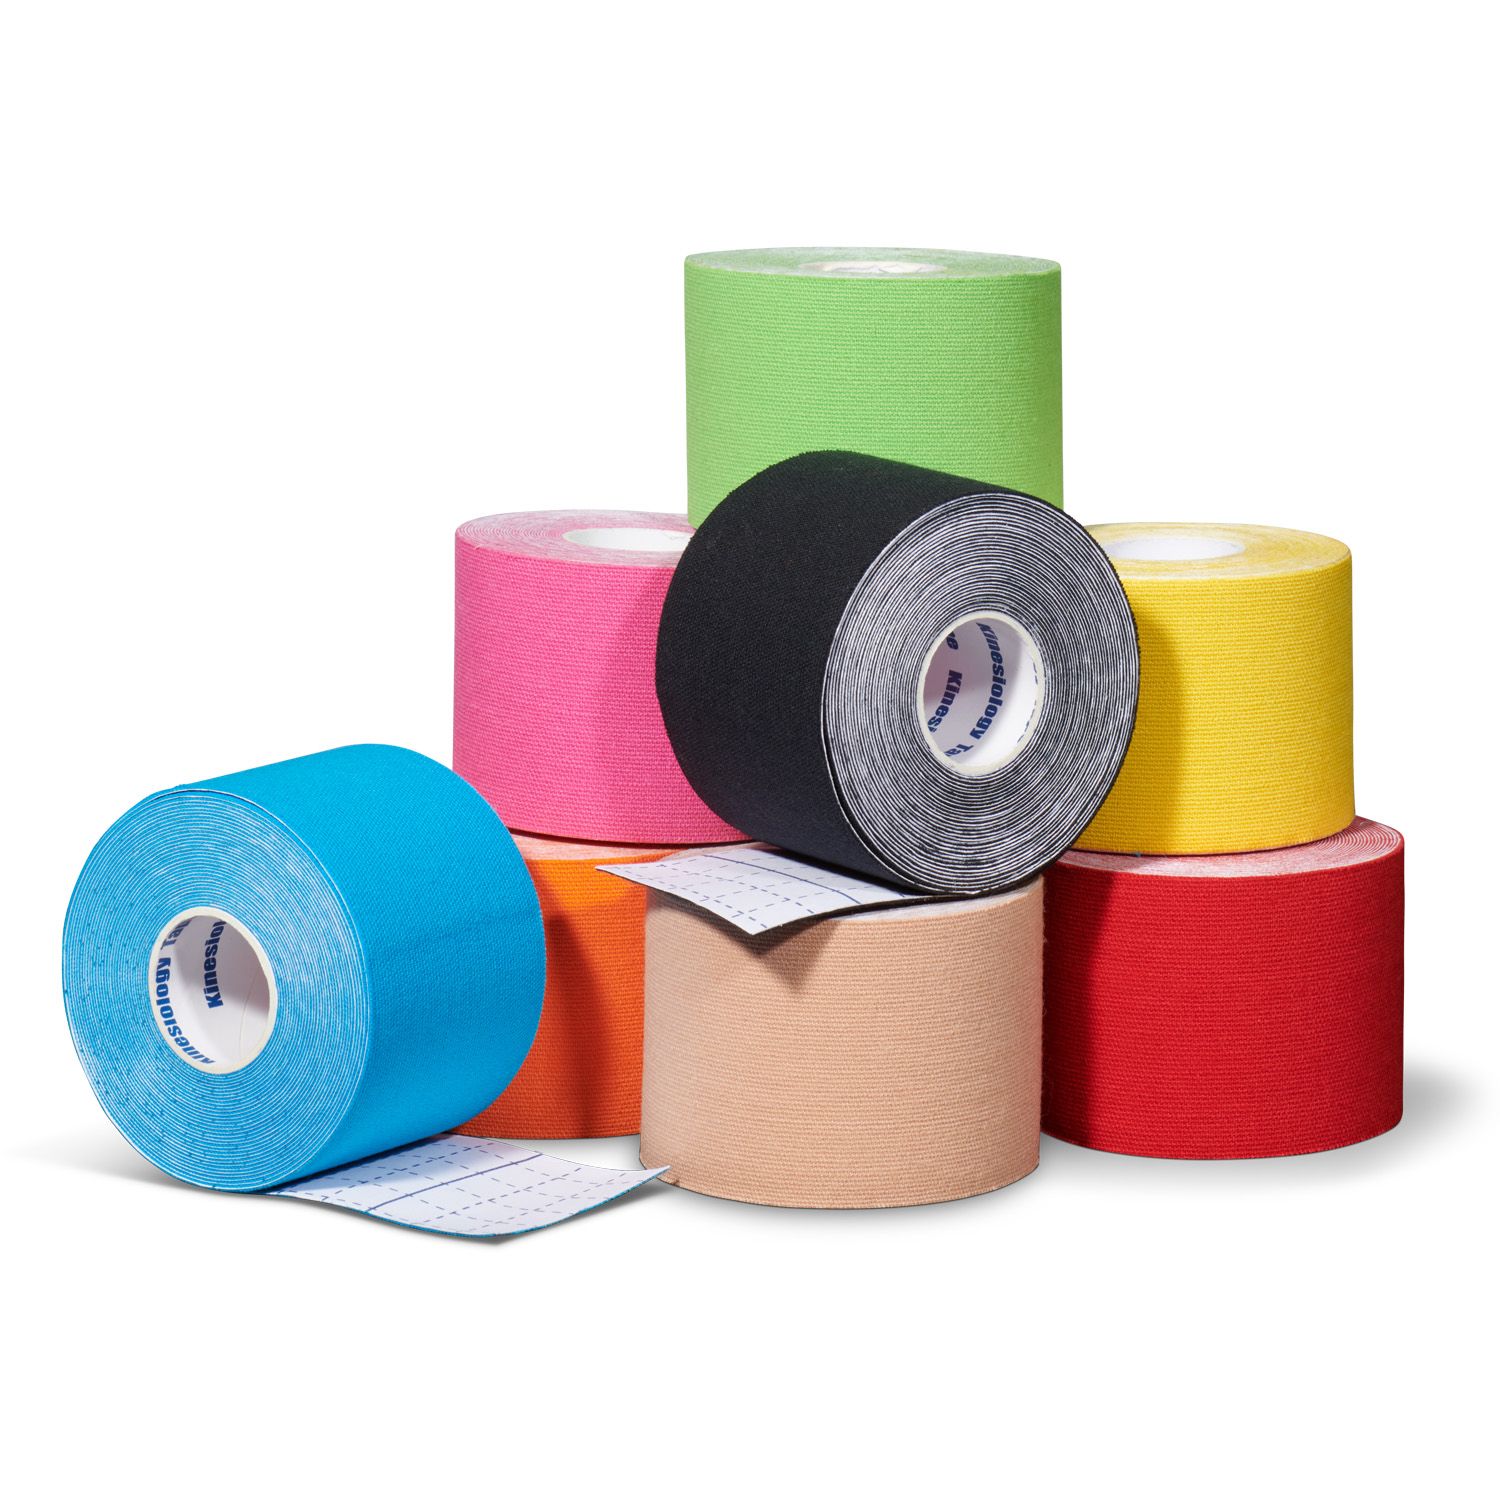 Kinesiology tape 6 rolls plus 2 rolls for free